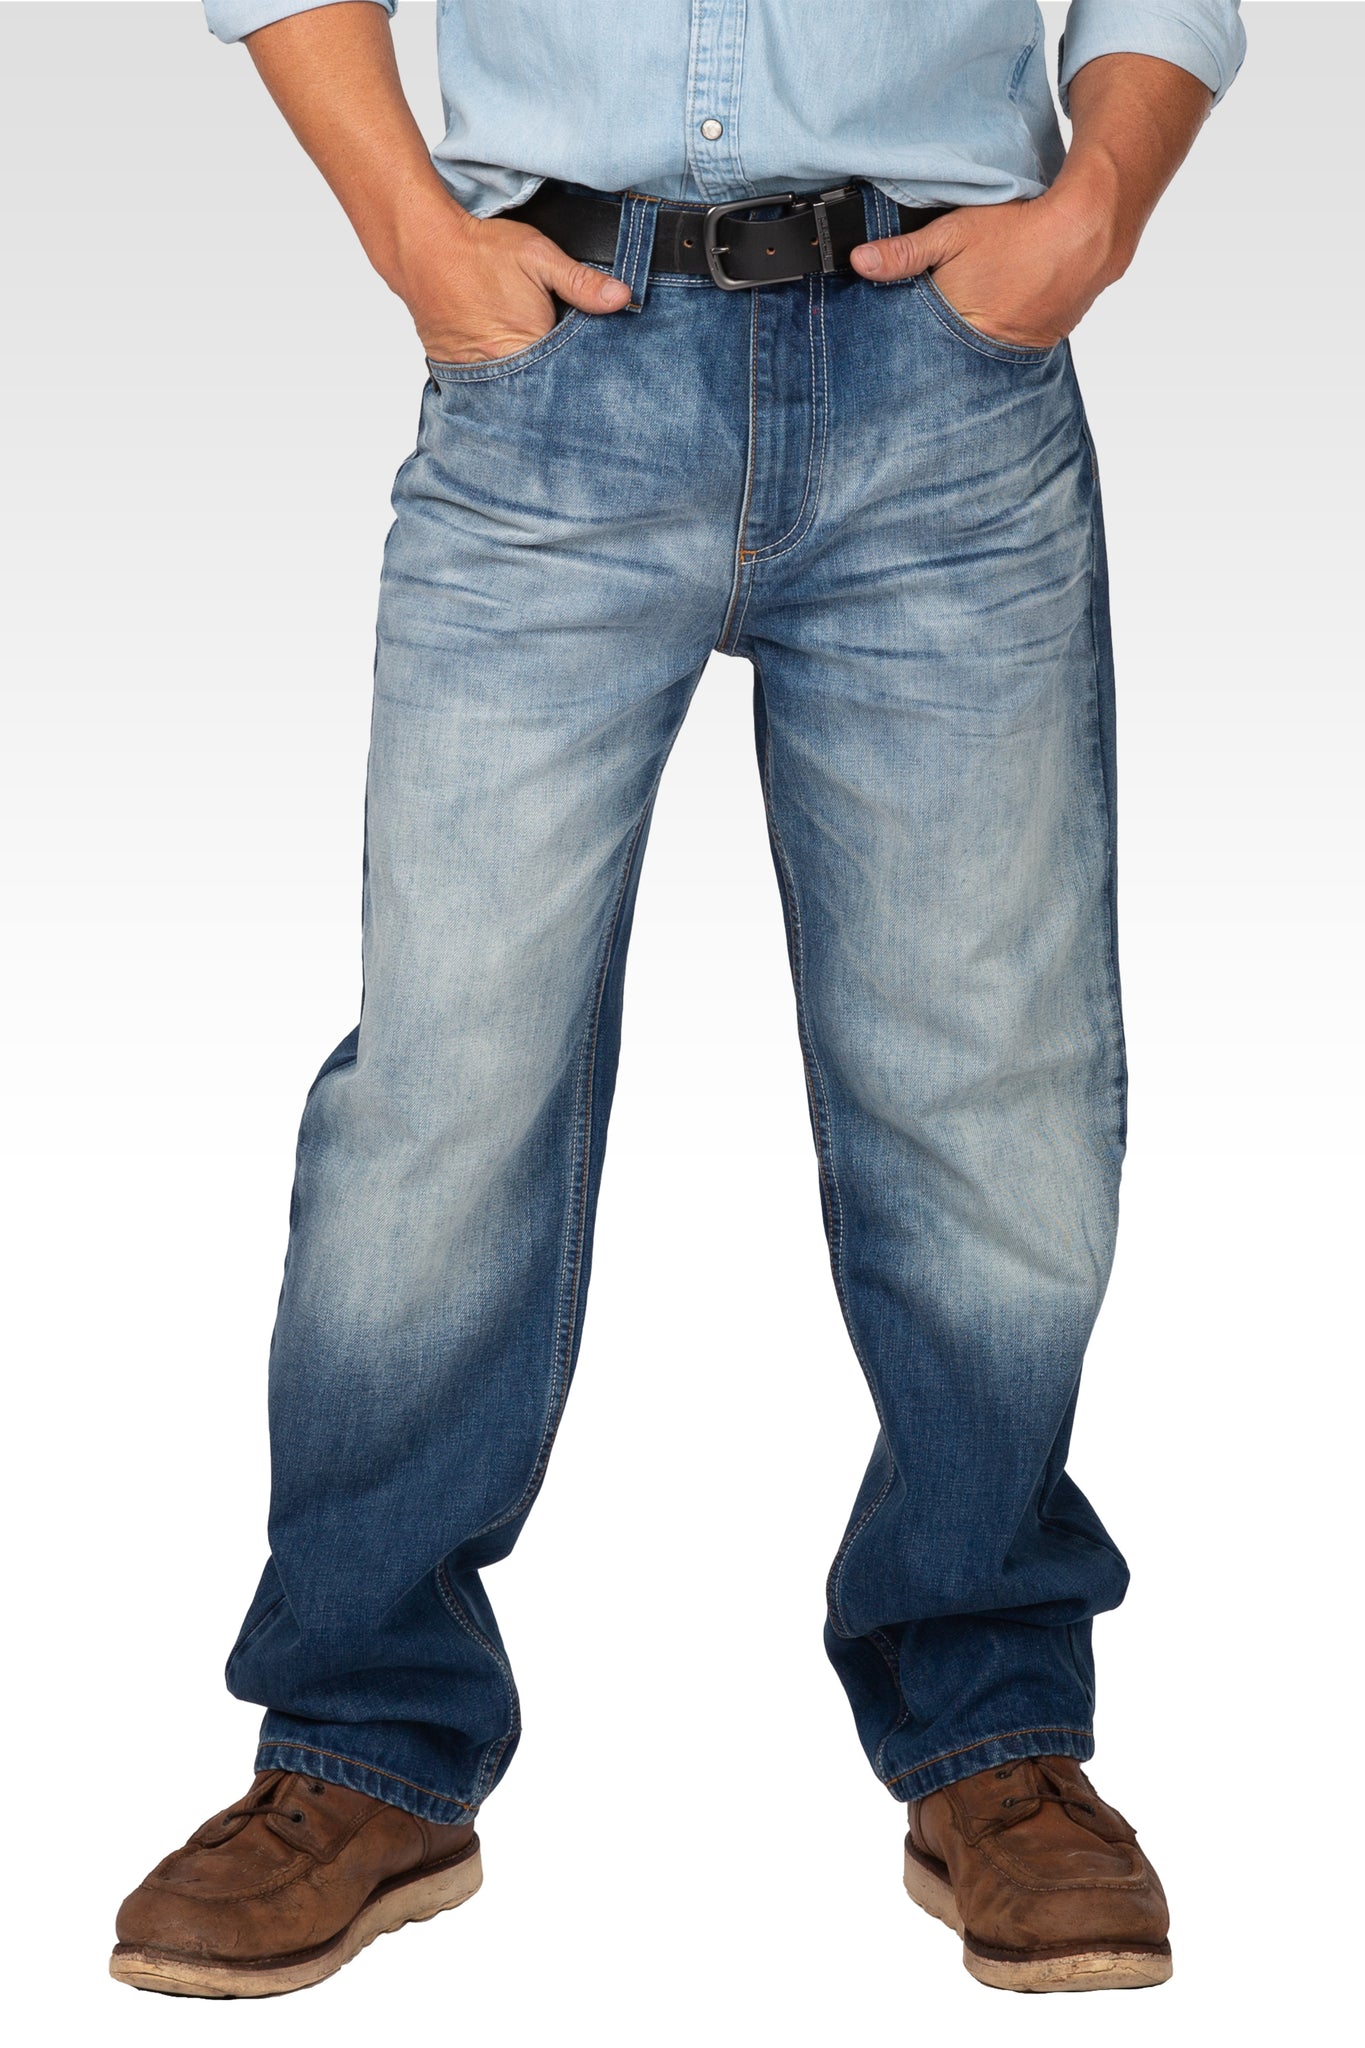 Midrise Relaxed Bootcut Blue Boy Wash Premium Denim Jeans Whiskering Hand Sanded